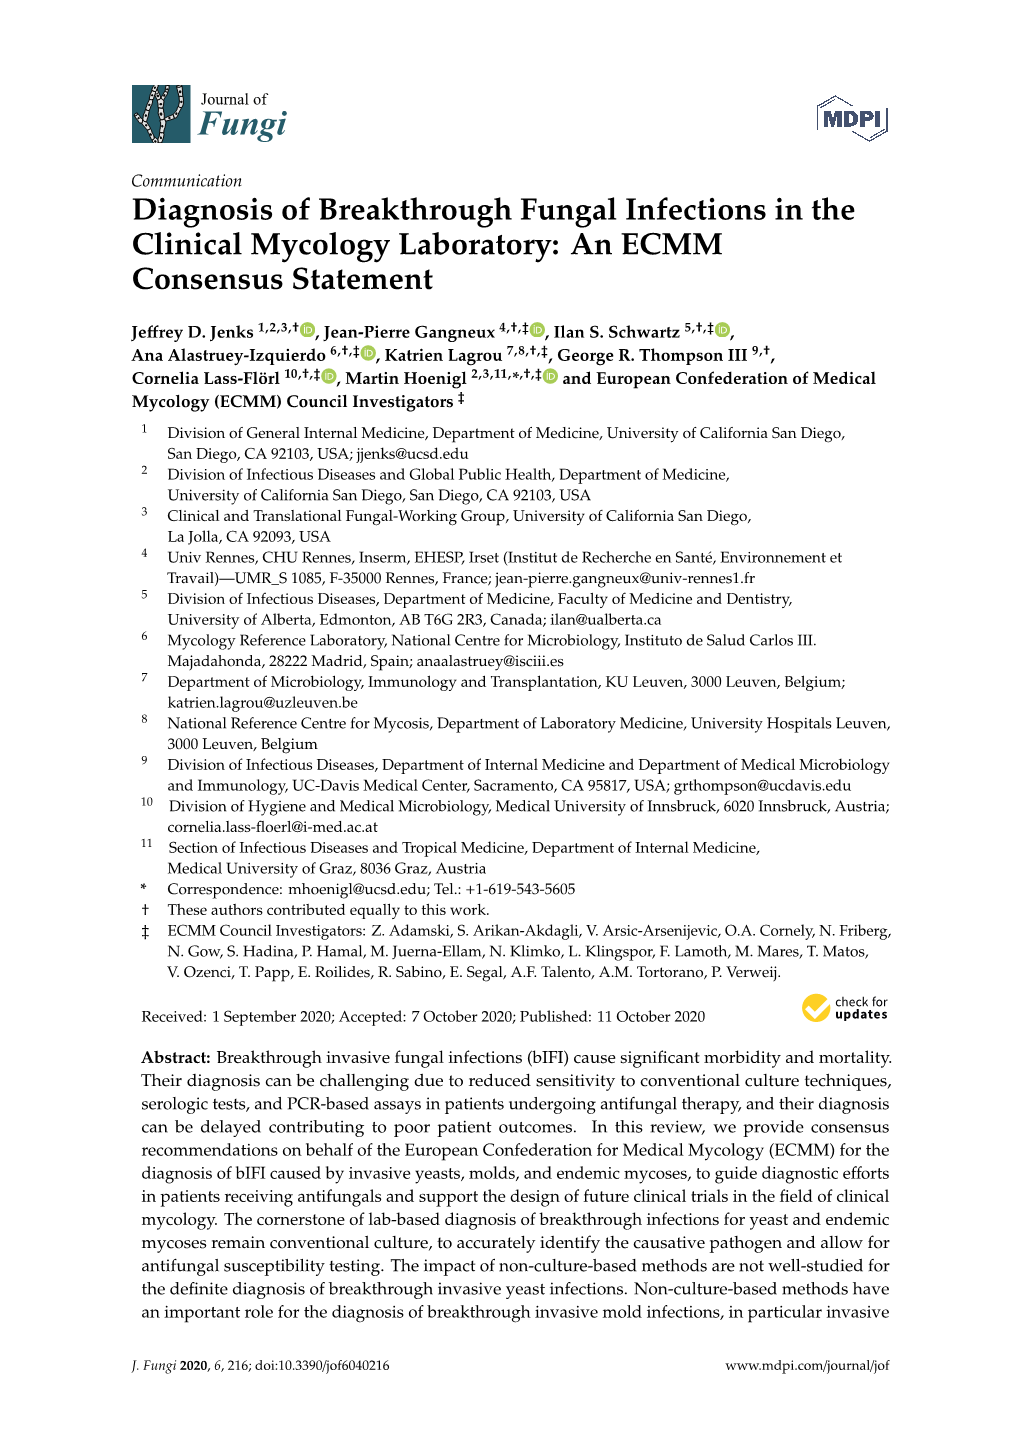 Diagnosis of Breakthrough Fungal Infections in the Clinical Mycology Laboratory: an ECMM Consensus Statement